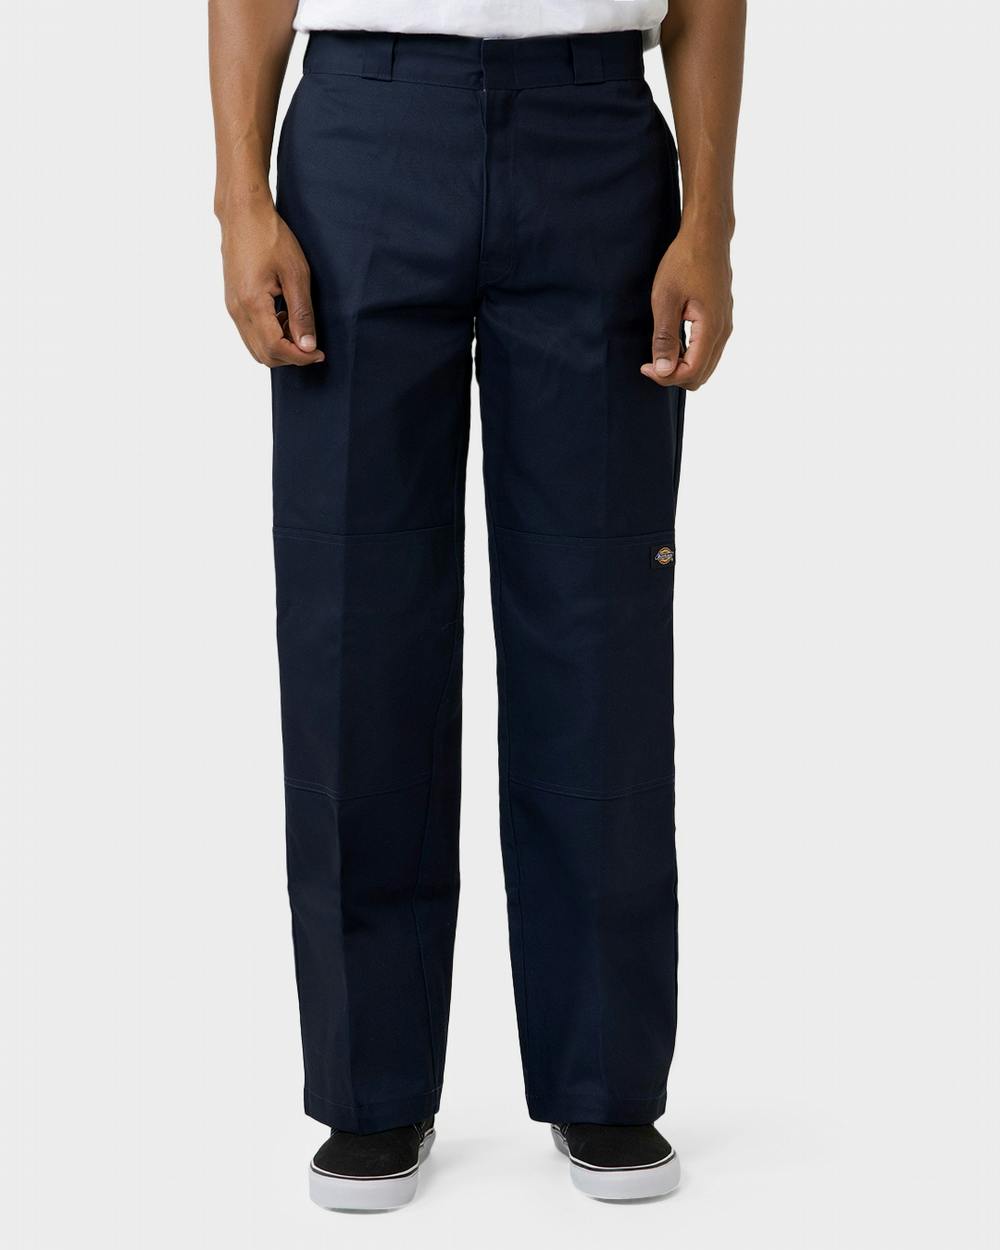 85-283 Loose Fit Double-Knee Work Pant